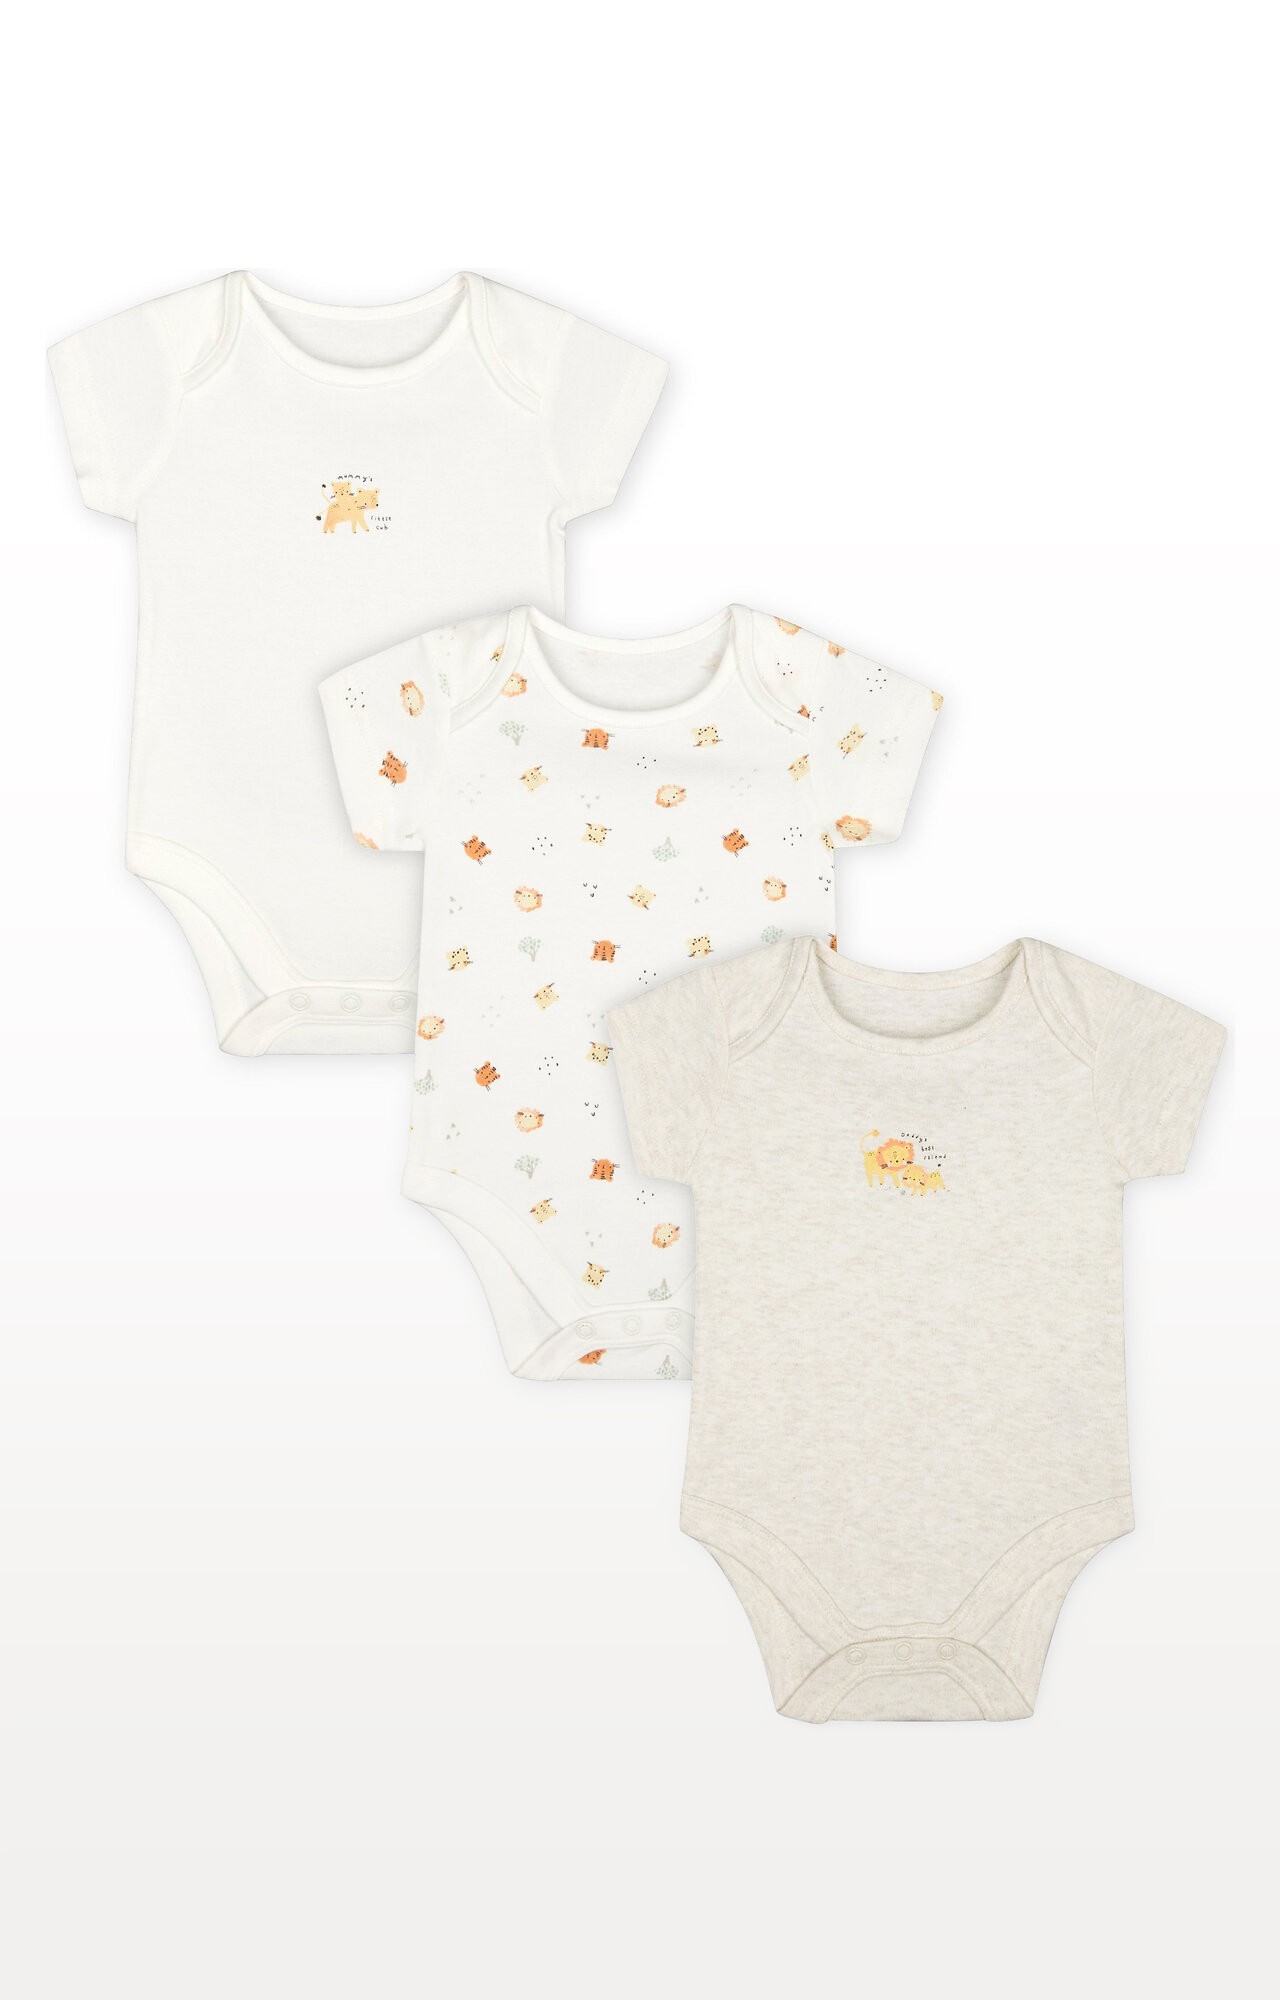 Mothercare | Little Cub Bodysuits - Pack of 3